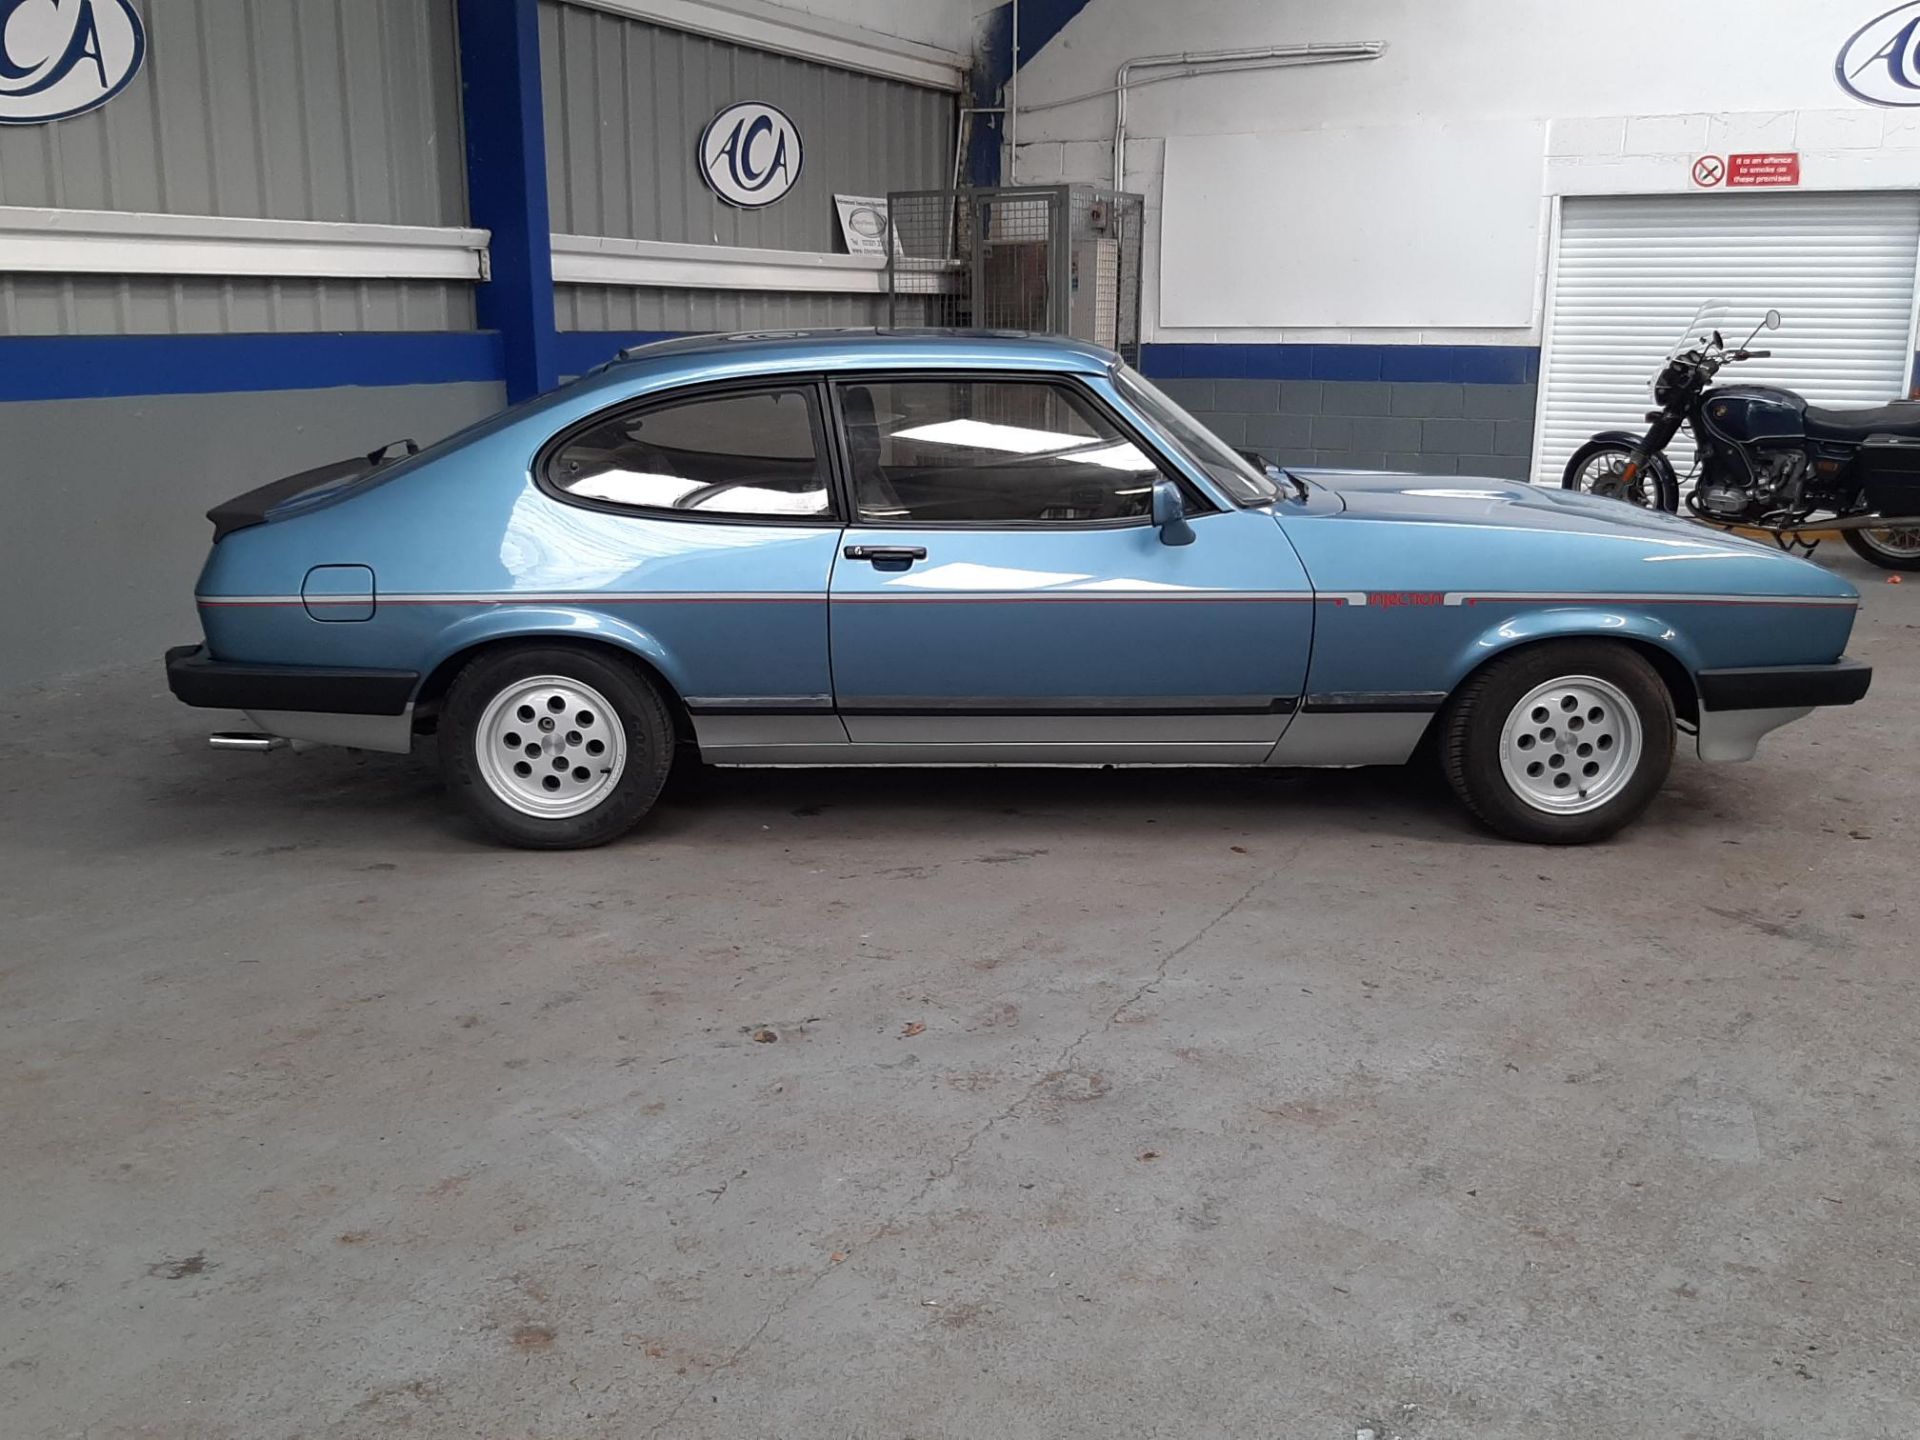 1982 Ford Capri 2.8 Injection - Image 8 of 23